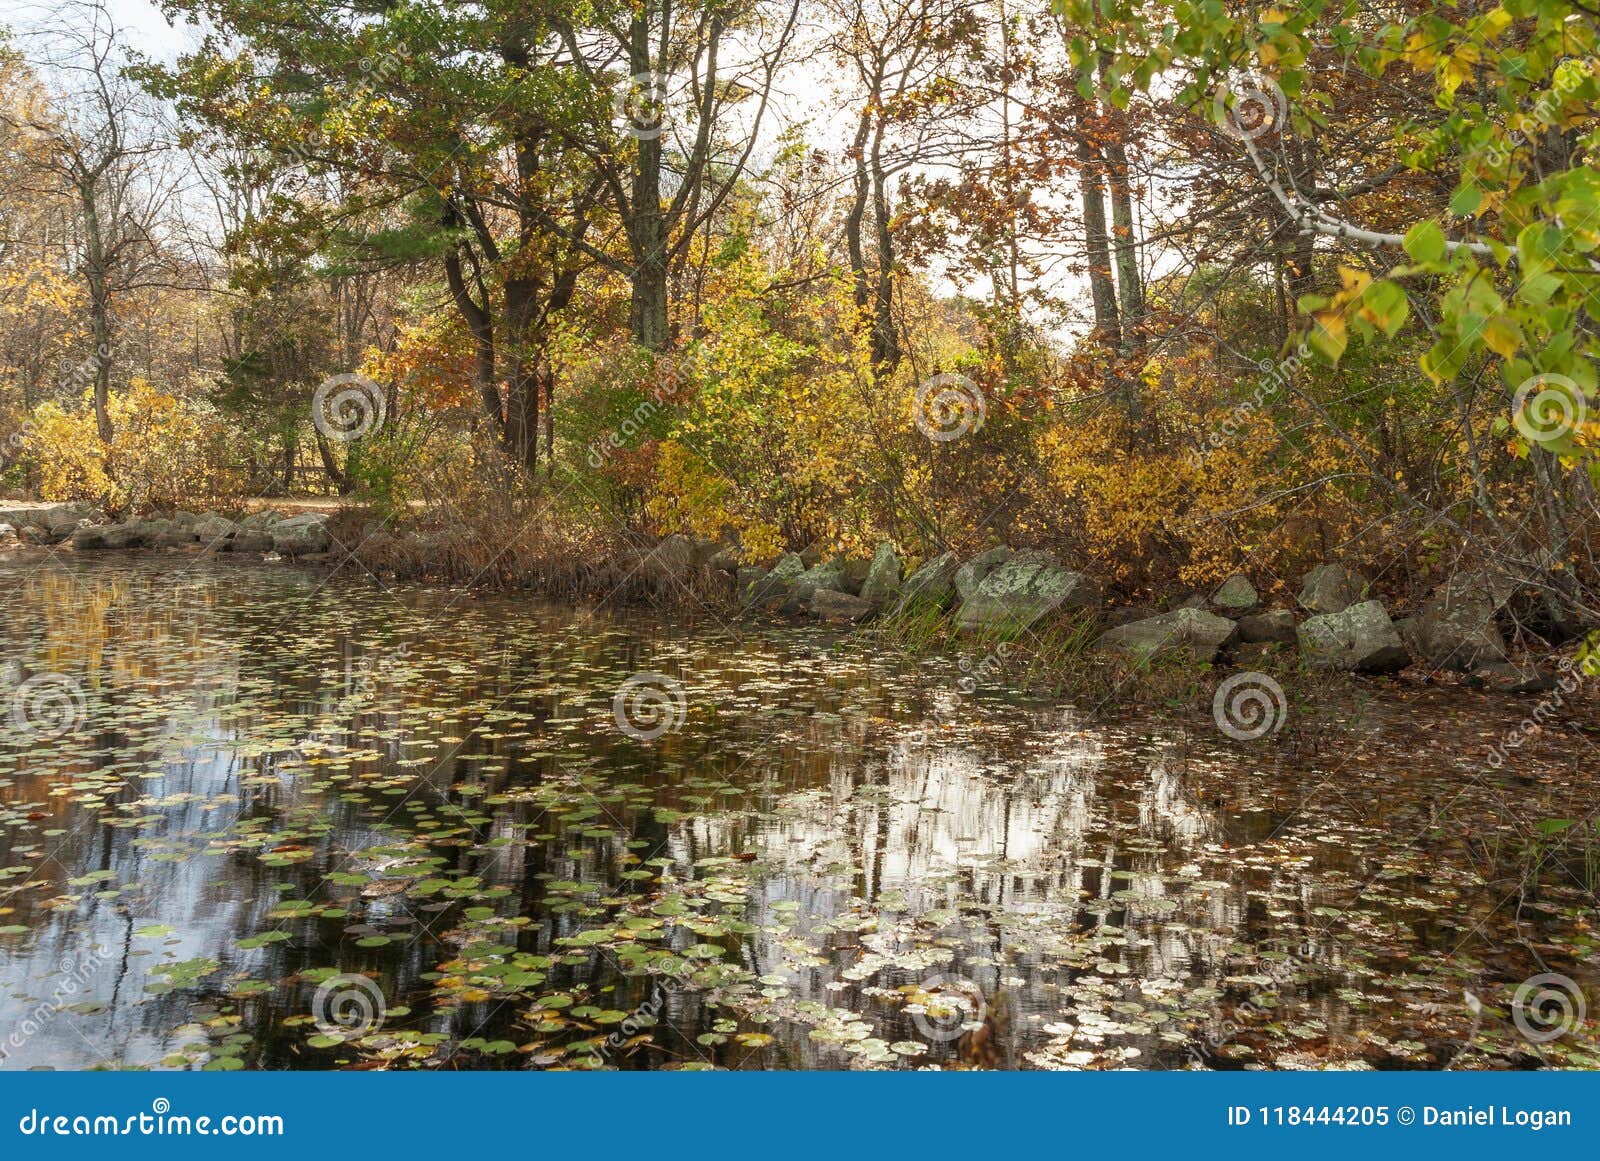 leaves changing on pond in borderland